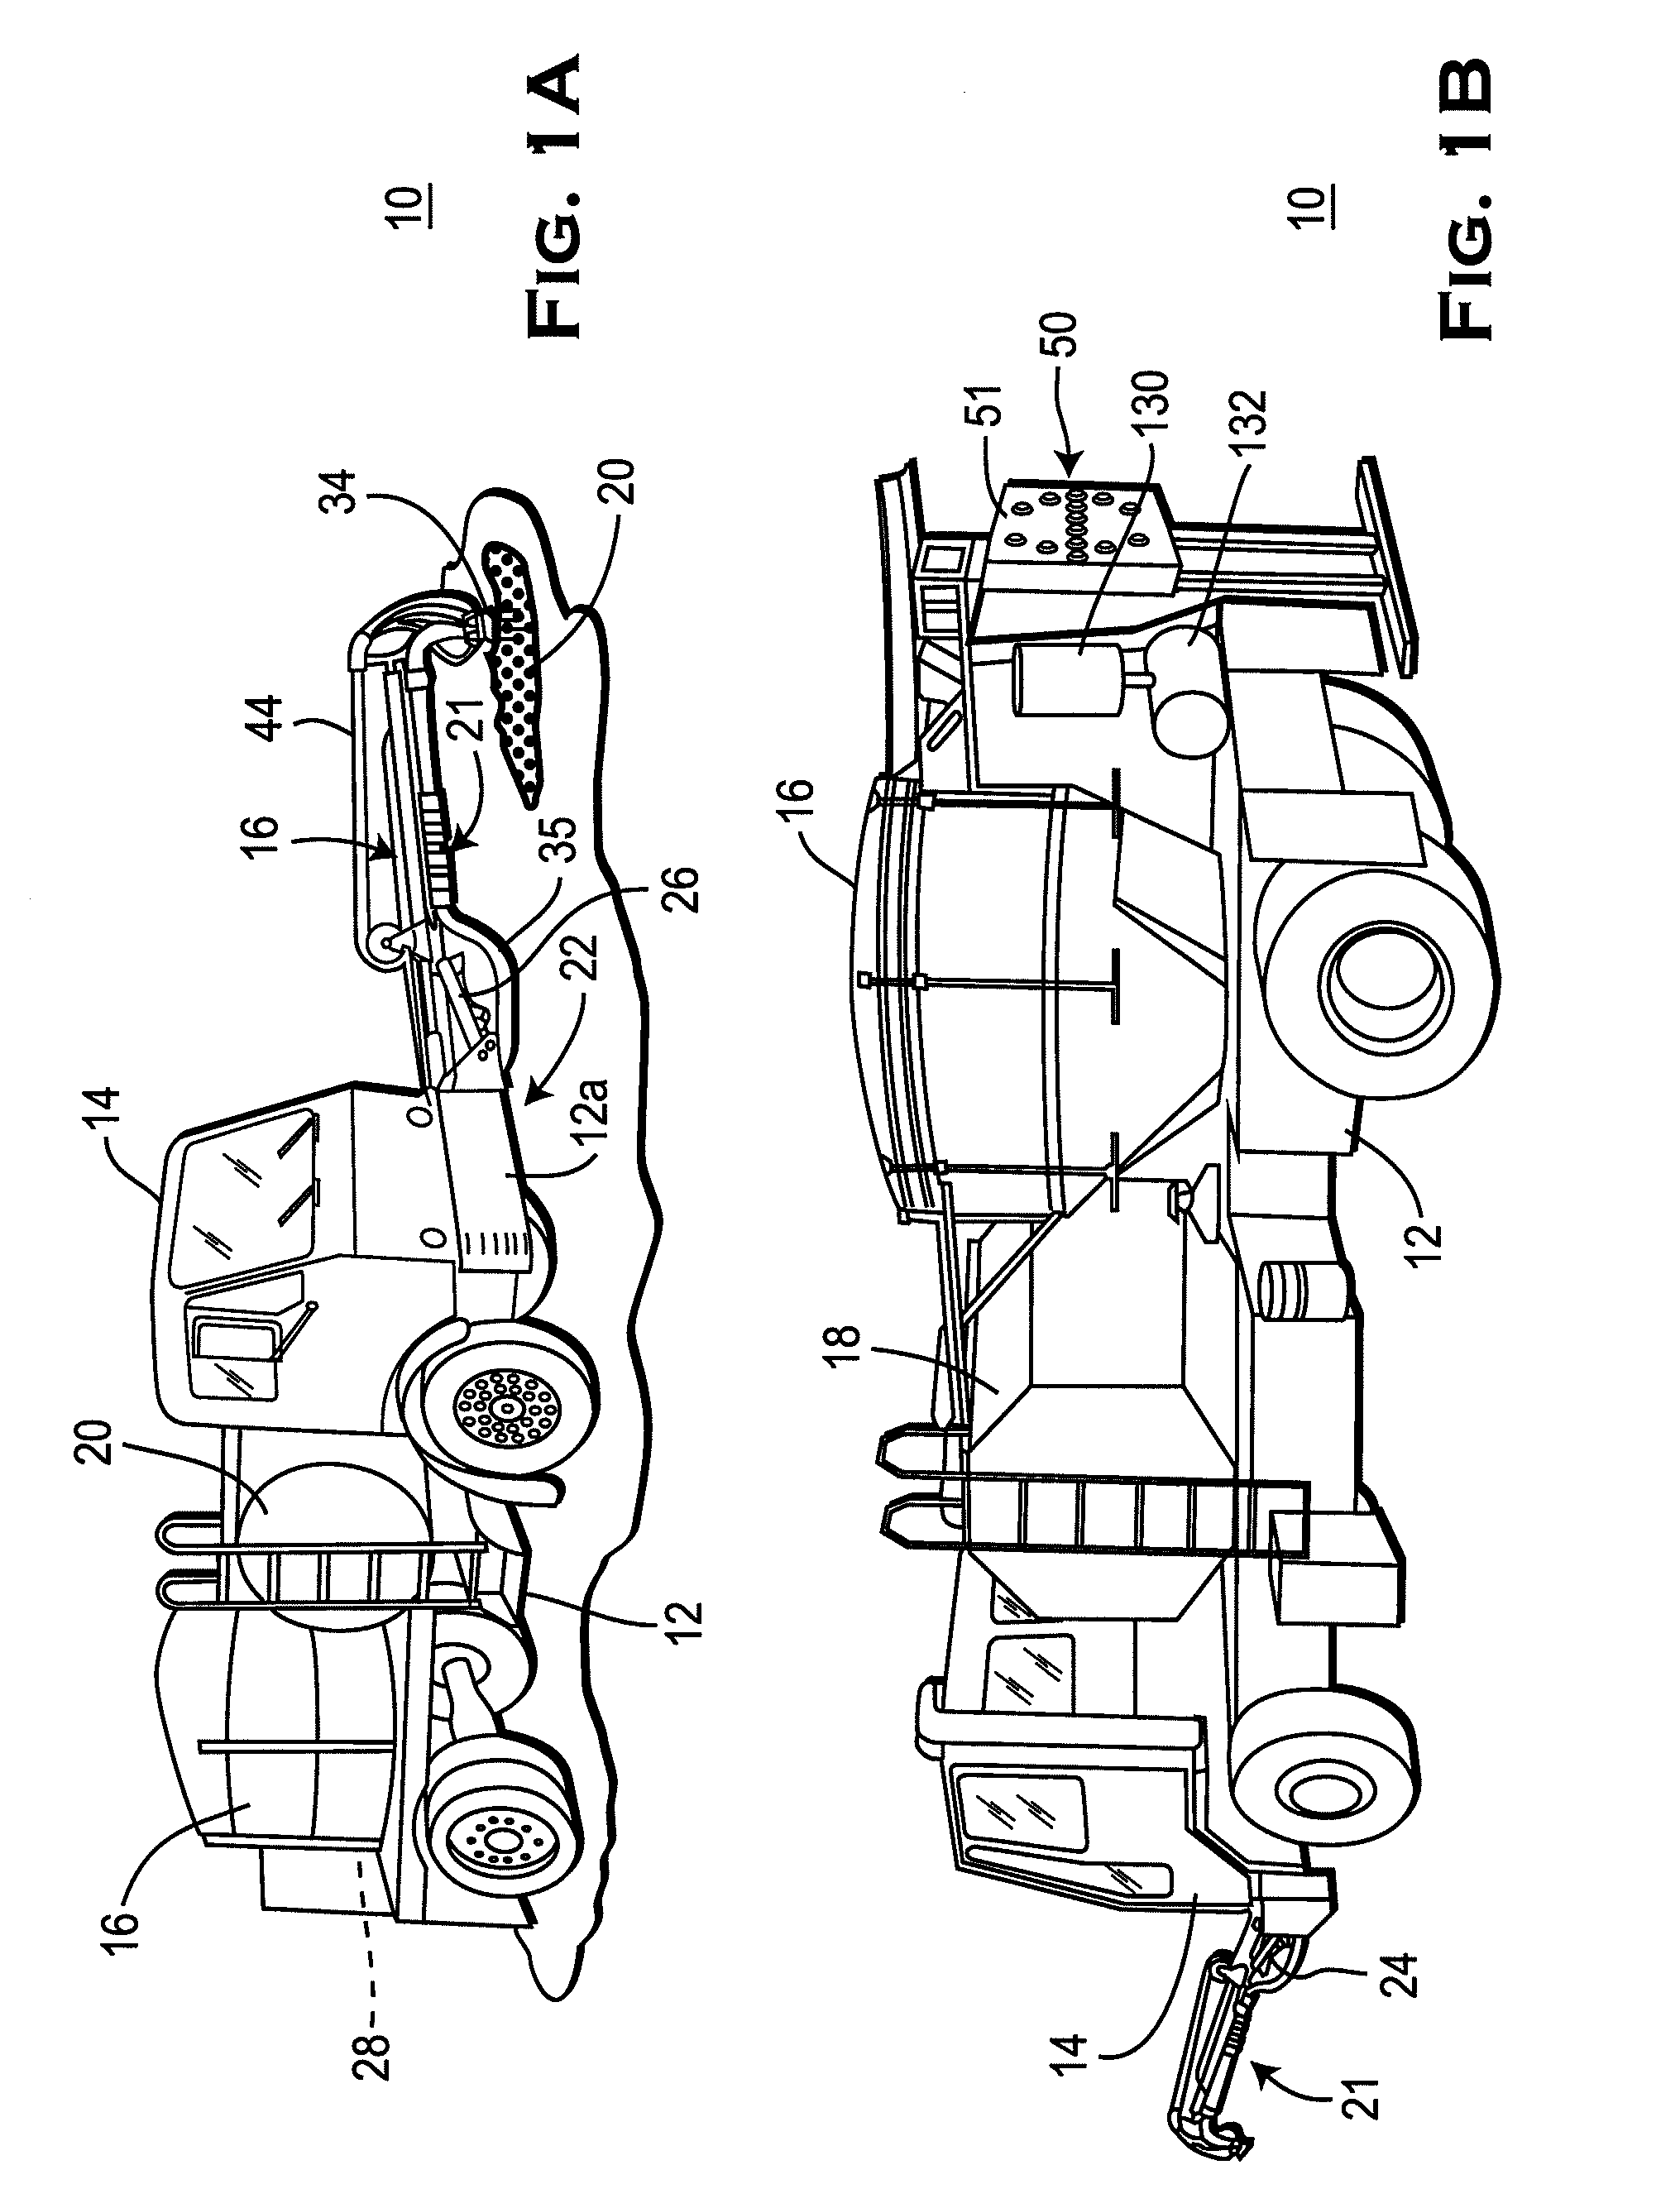 Method and apparatus for repairing potholes and the like